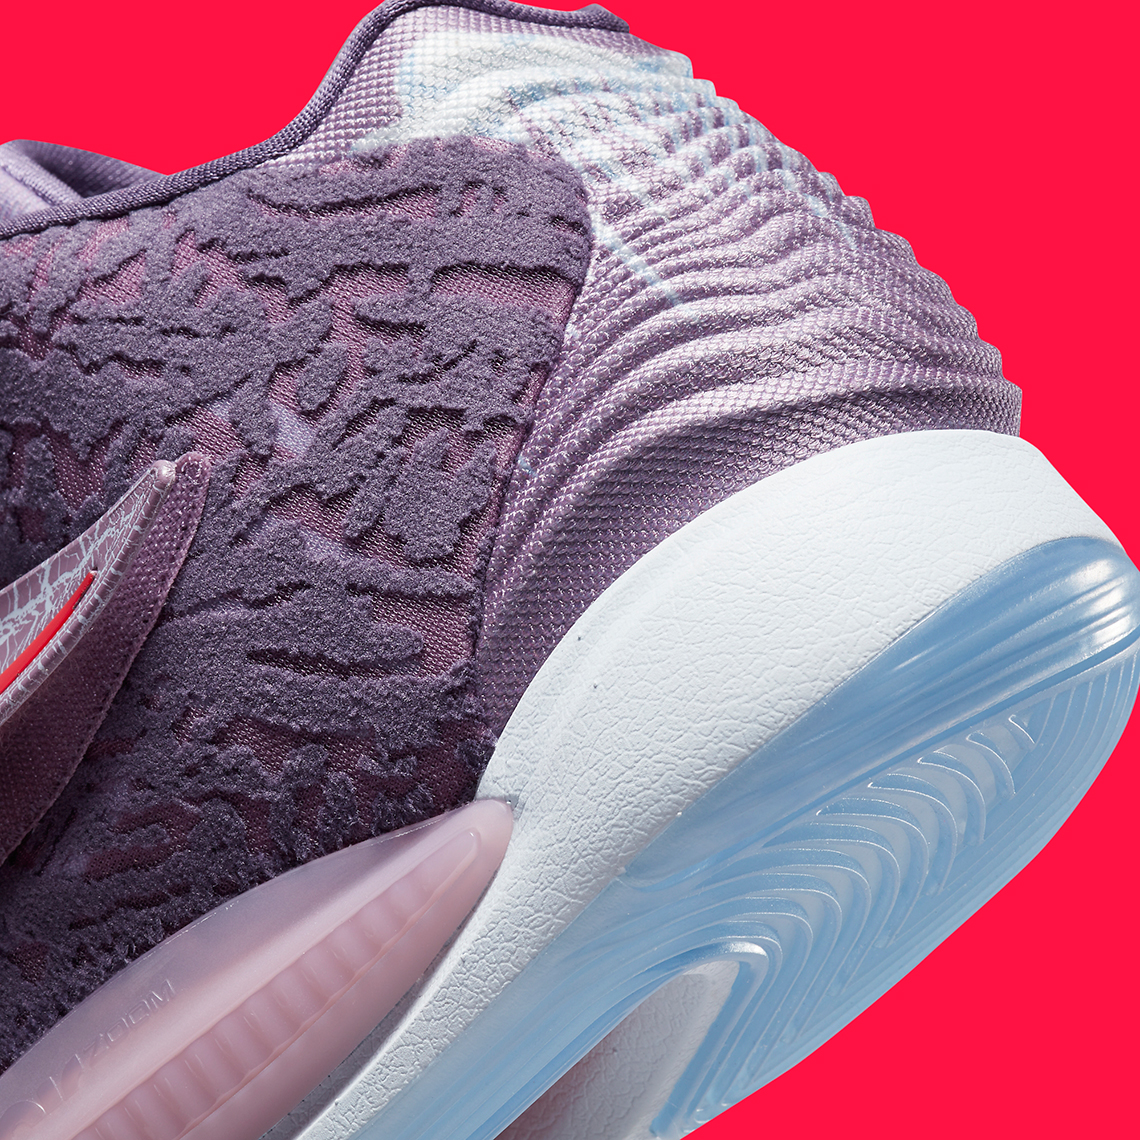 nike epic kd 14 valentines day release date 8